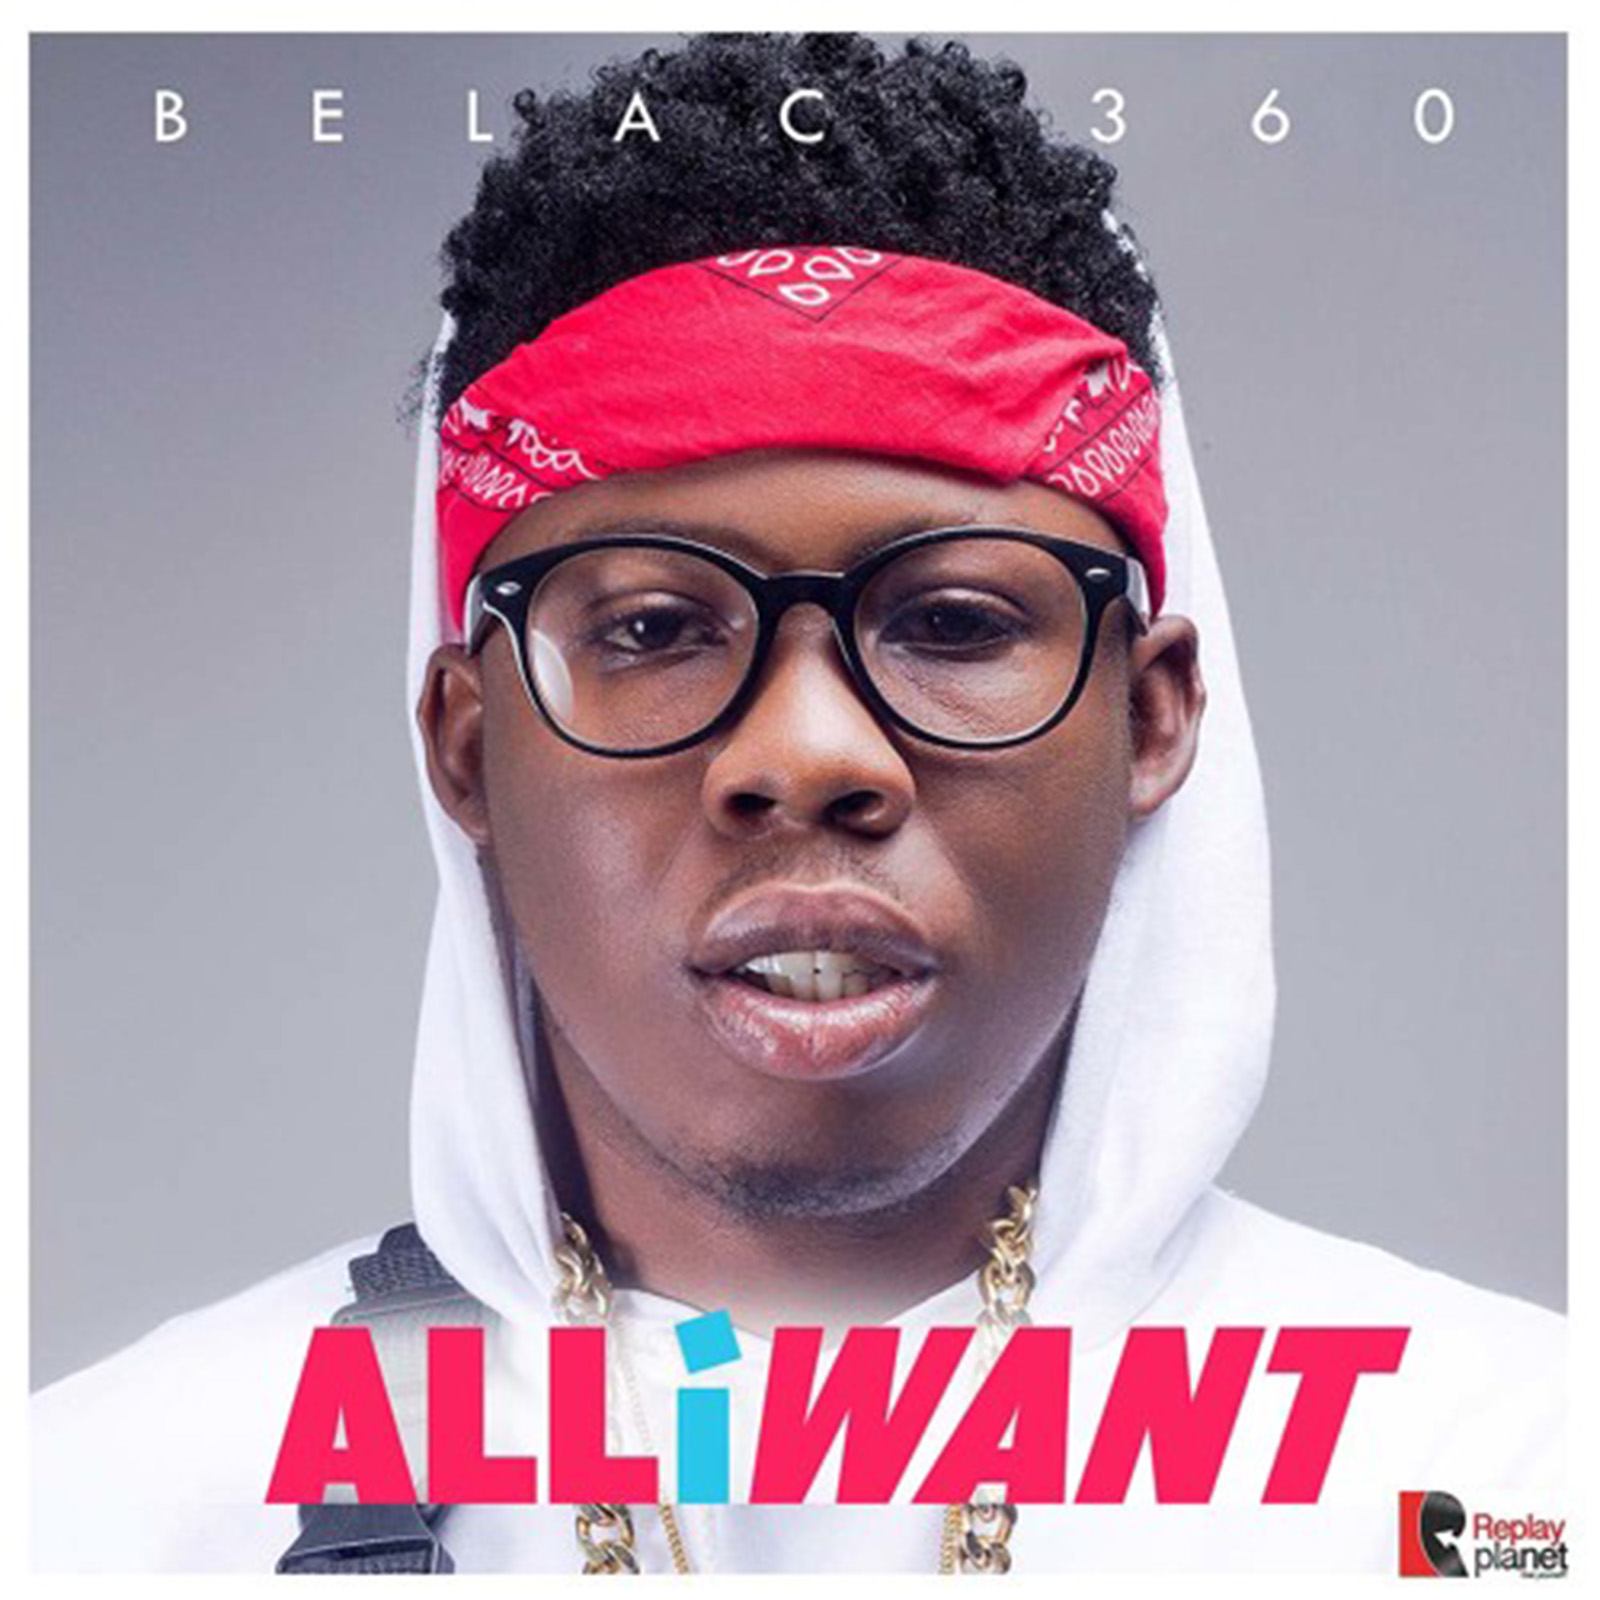 All I Want by Belac 360